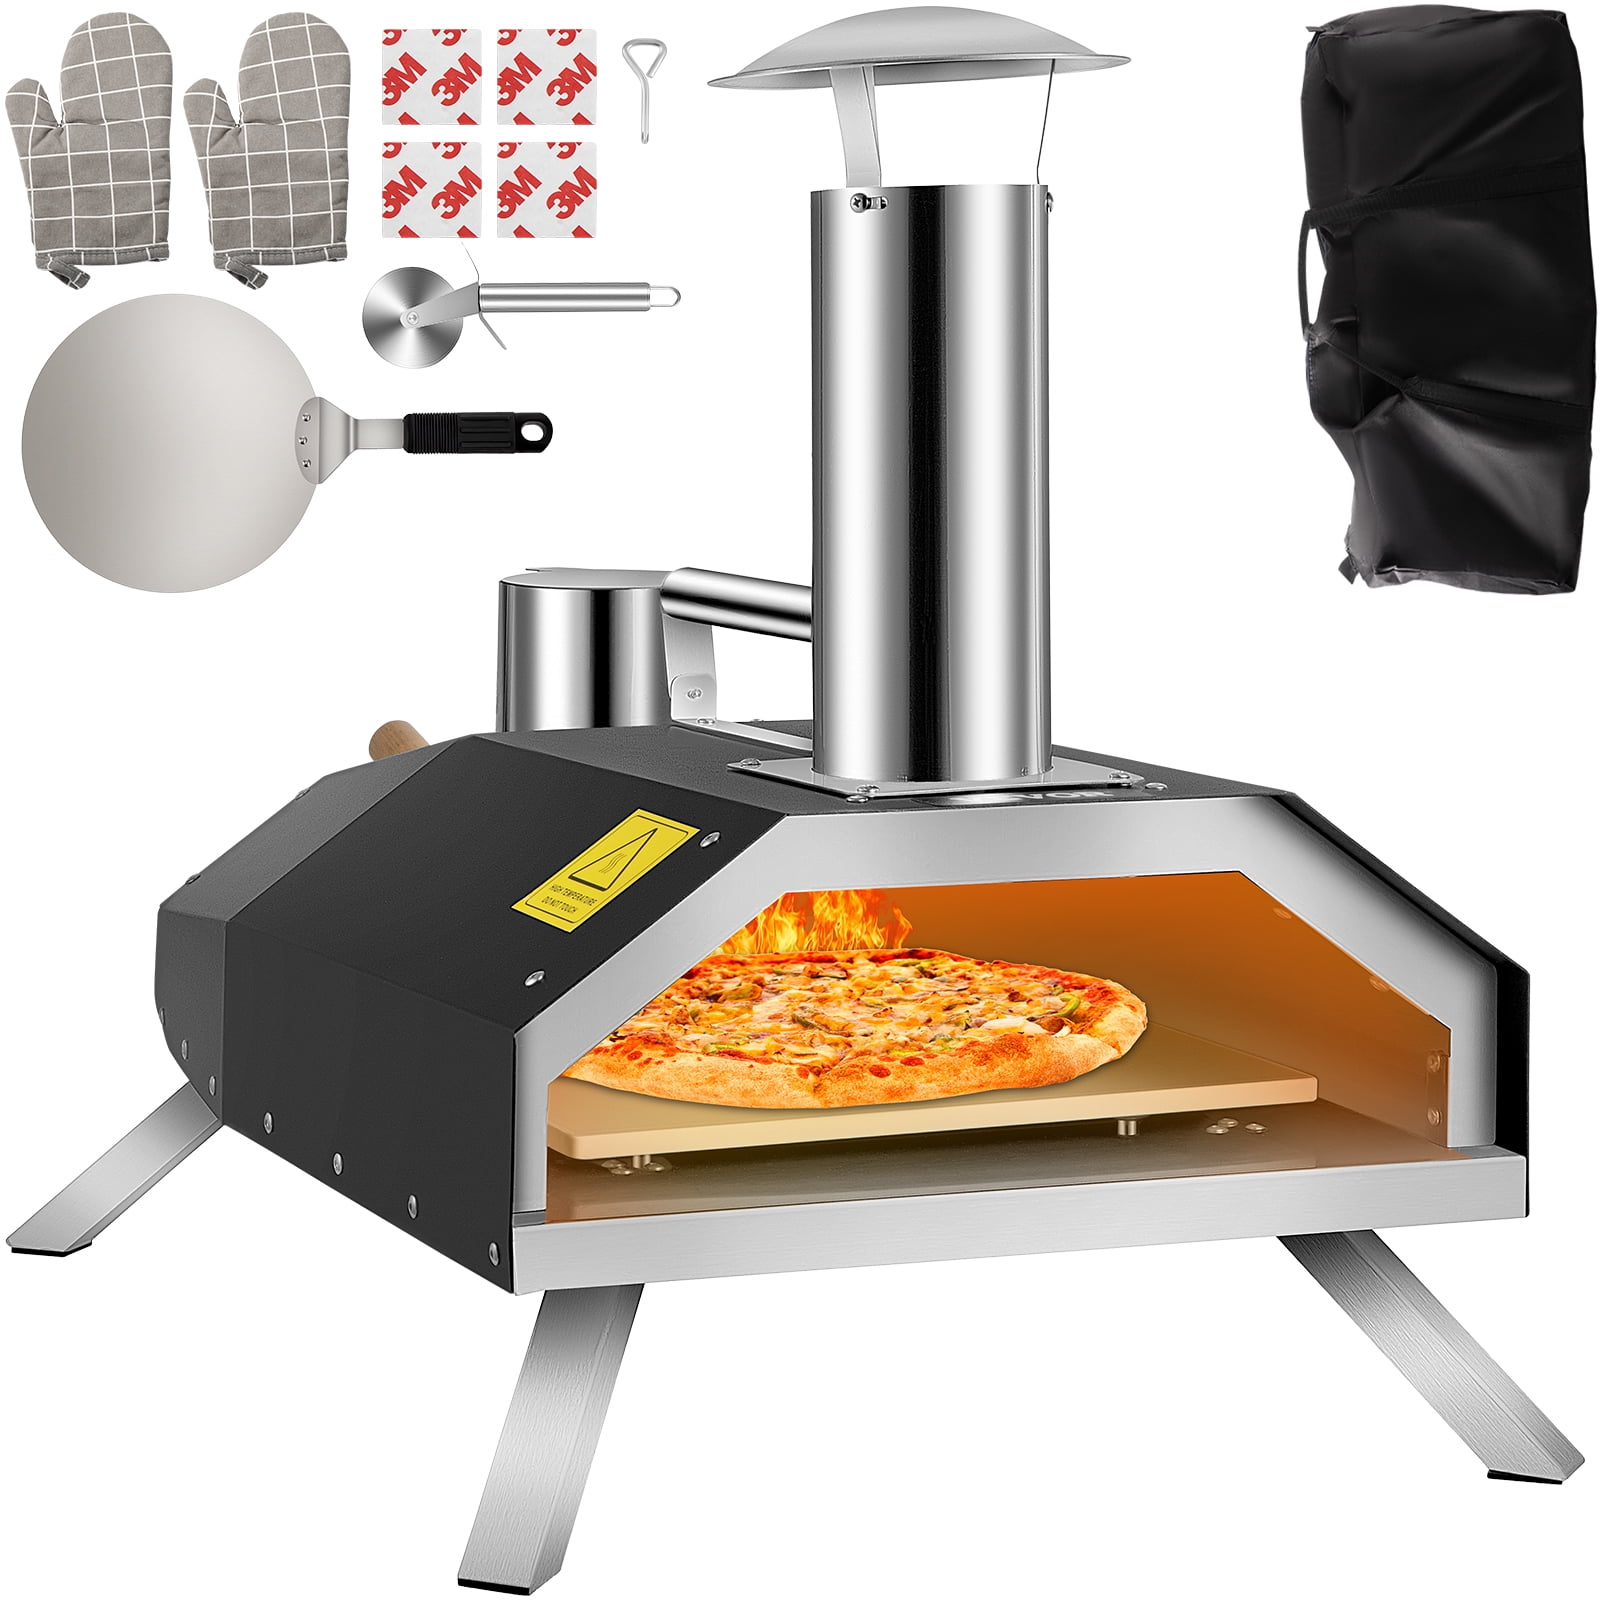 5 Tips for Superior Pizza with Ooni Ovens